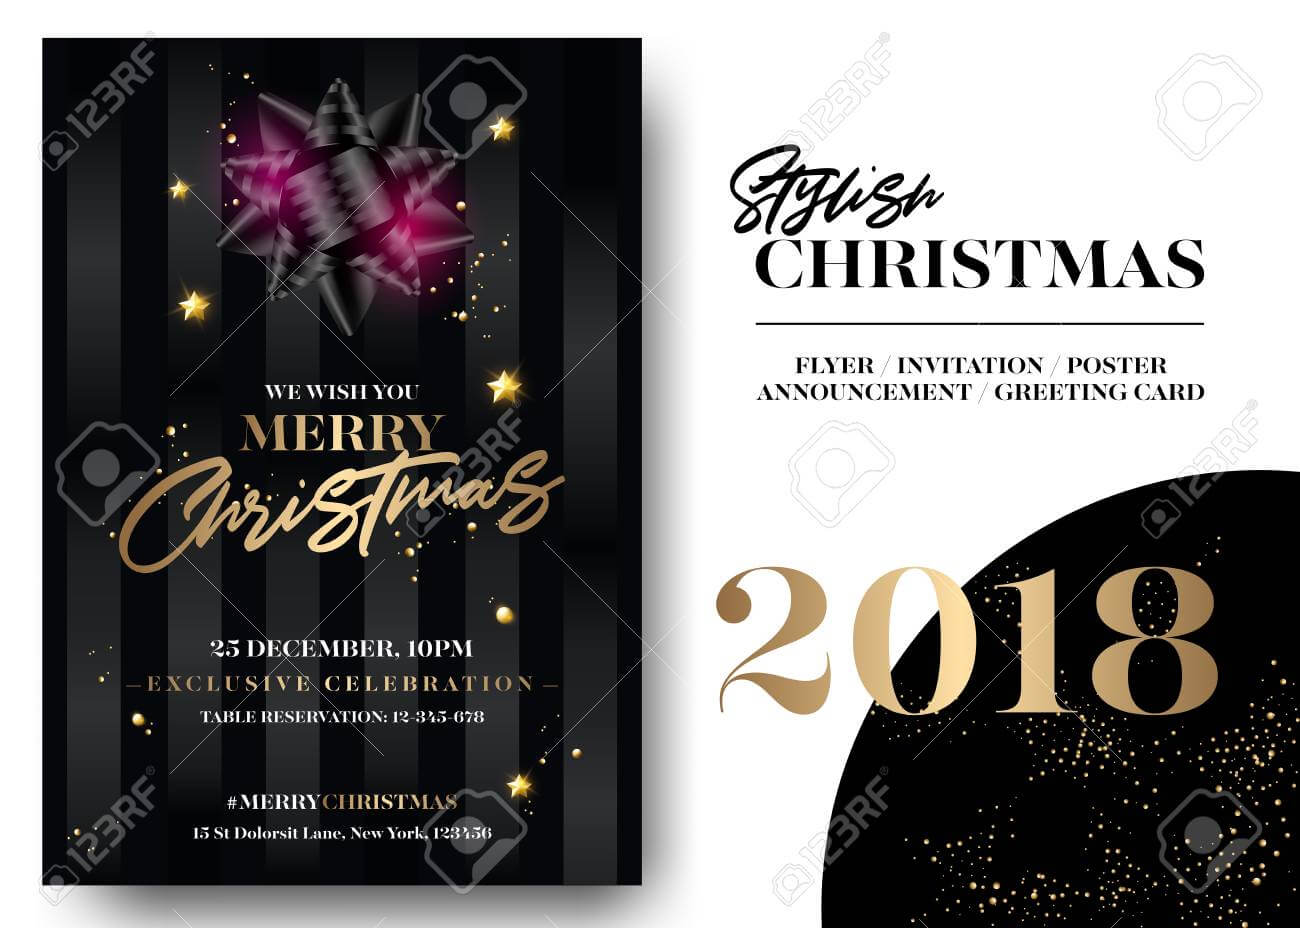 Merry Christmas Greeting Card Template. Vector Elegant Black.. For Table Reservation Card Template